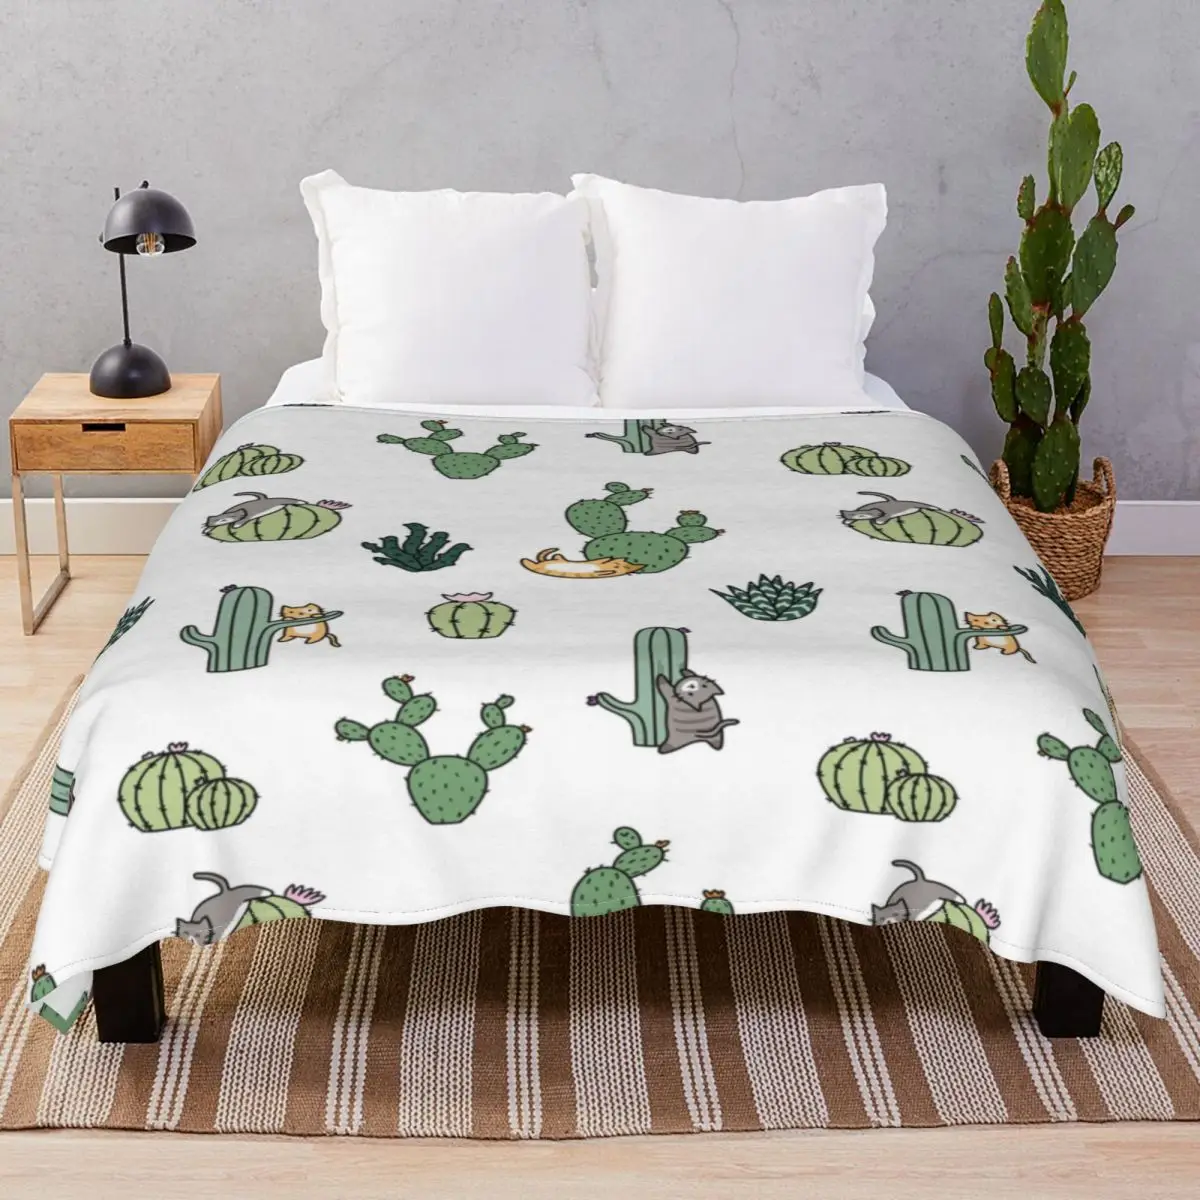 Cacti Cats Blankets Flannel All Season Comfortable Throw Blanket for Bed Home Couch Camp Cinema